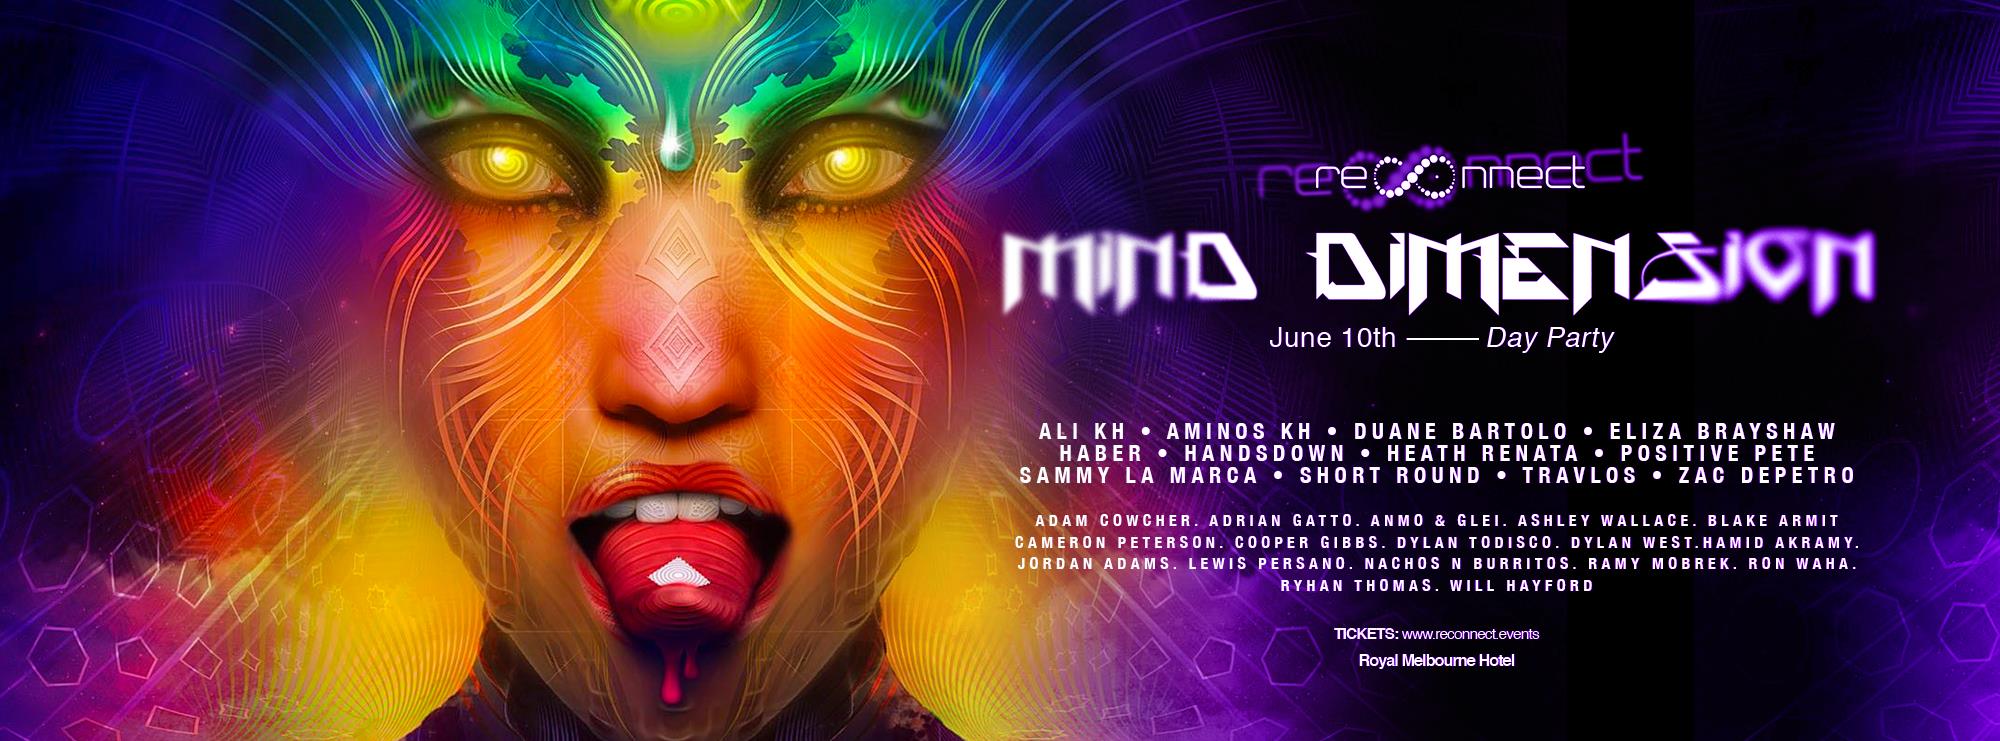 Press flyer image RECONNECT PRESENTS - MIND DIMENSION (DAY PARTY) - SUNDAY 10 JUNE, 2018